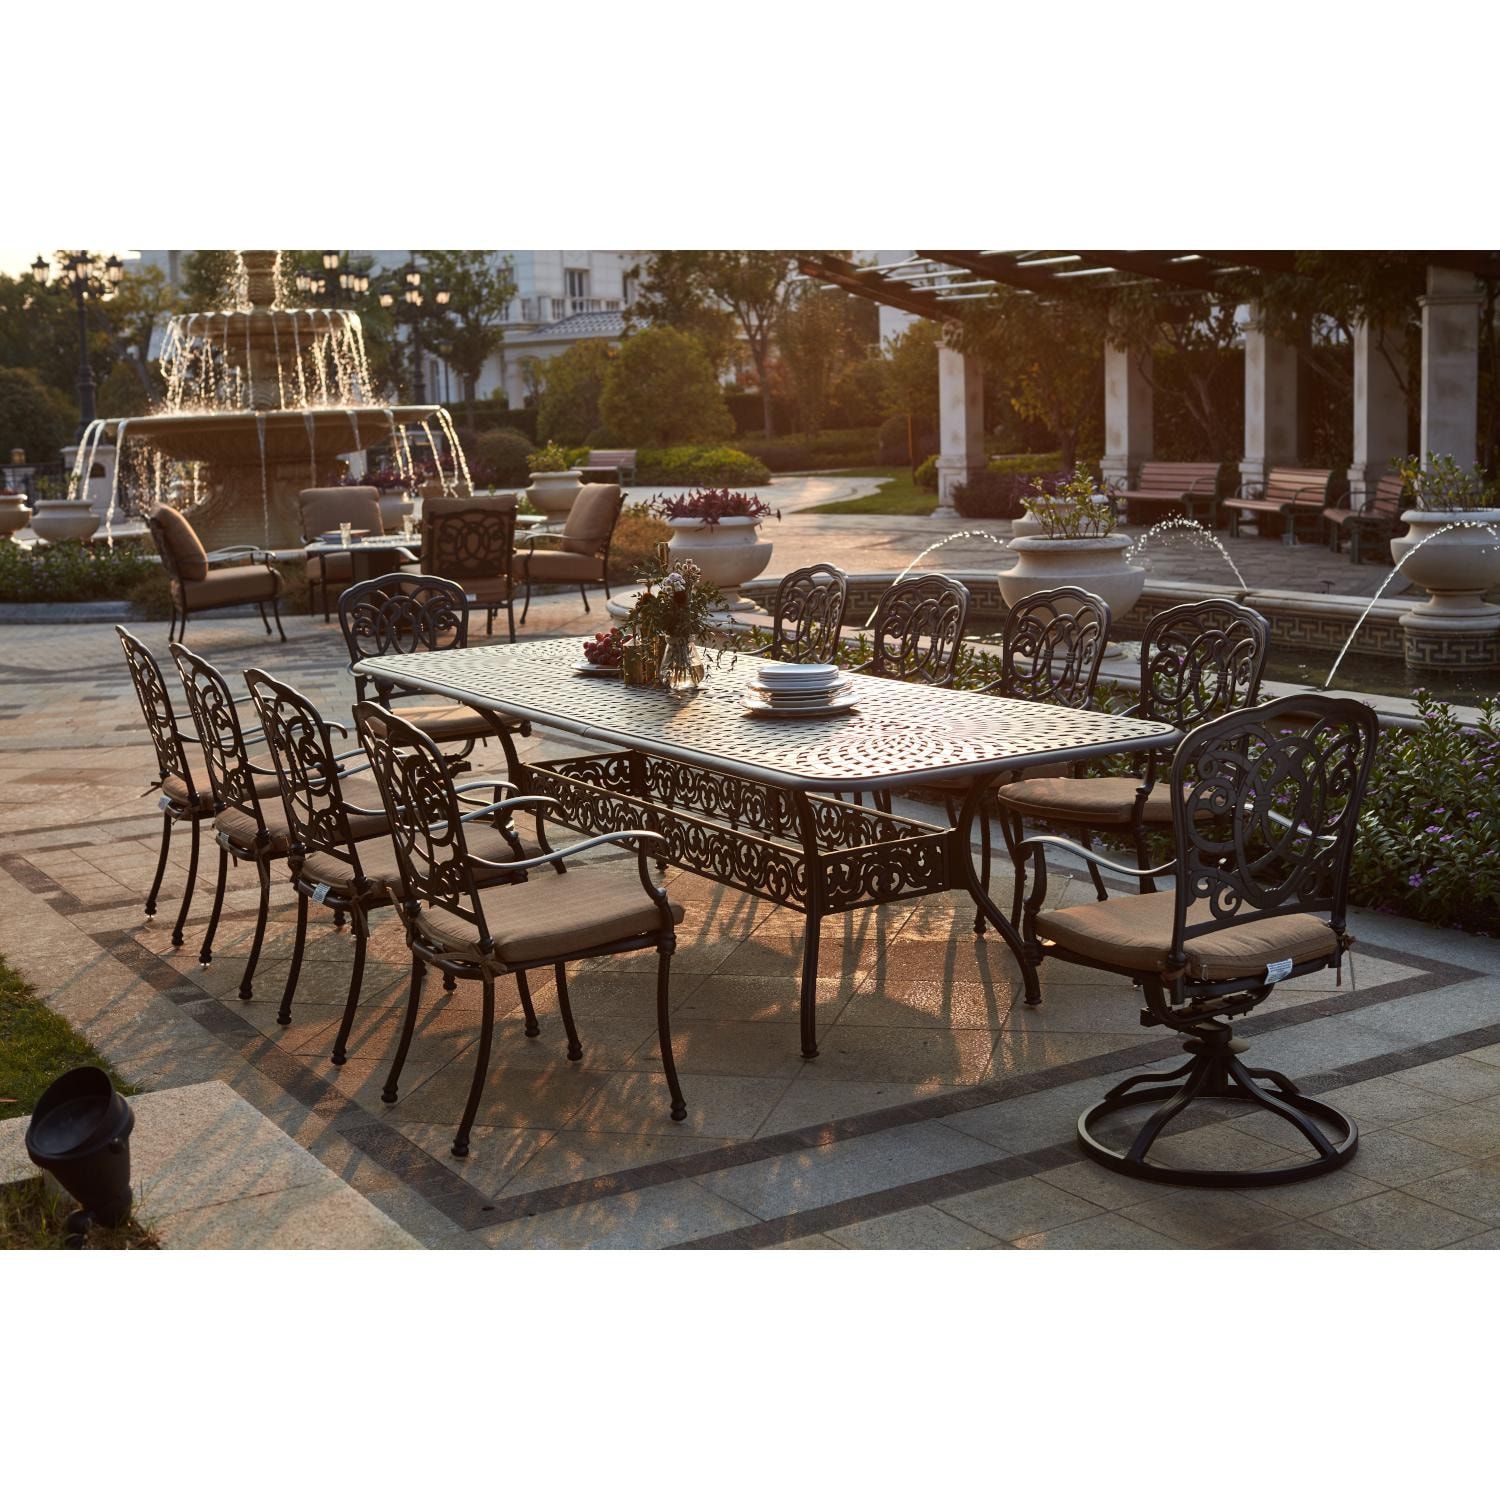 Darlee Florence 11 Piece Cast Aluminum Patio Dining Set W/ 92 X 42 Inch Pertaining To 11 Piece Extendable Patio Dining Sets (View 10 of 15)